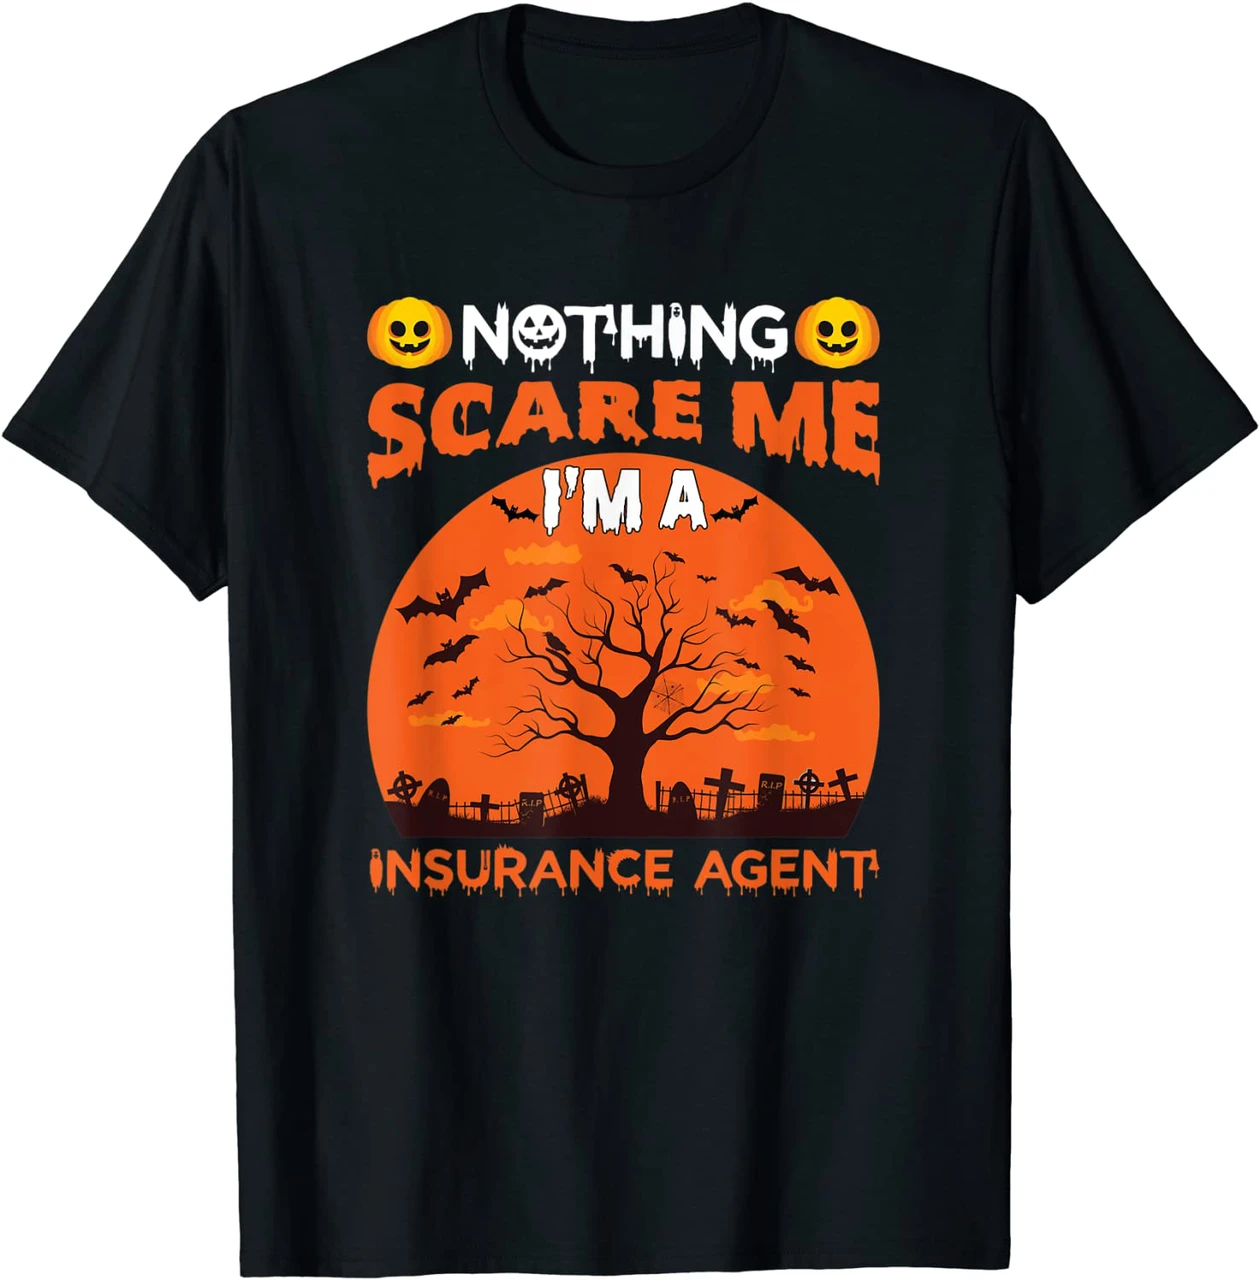 Nothing Scare Me I'M An Insurance Agent Funny Halloween Shirt